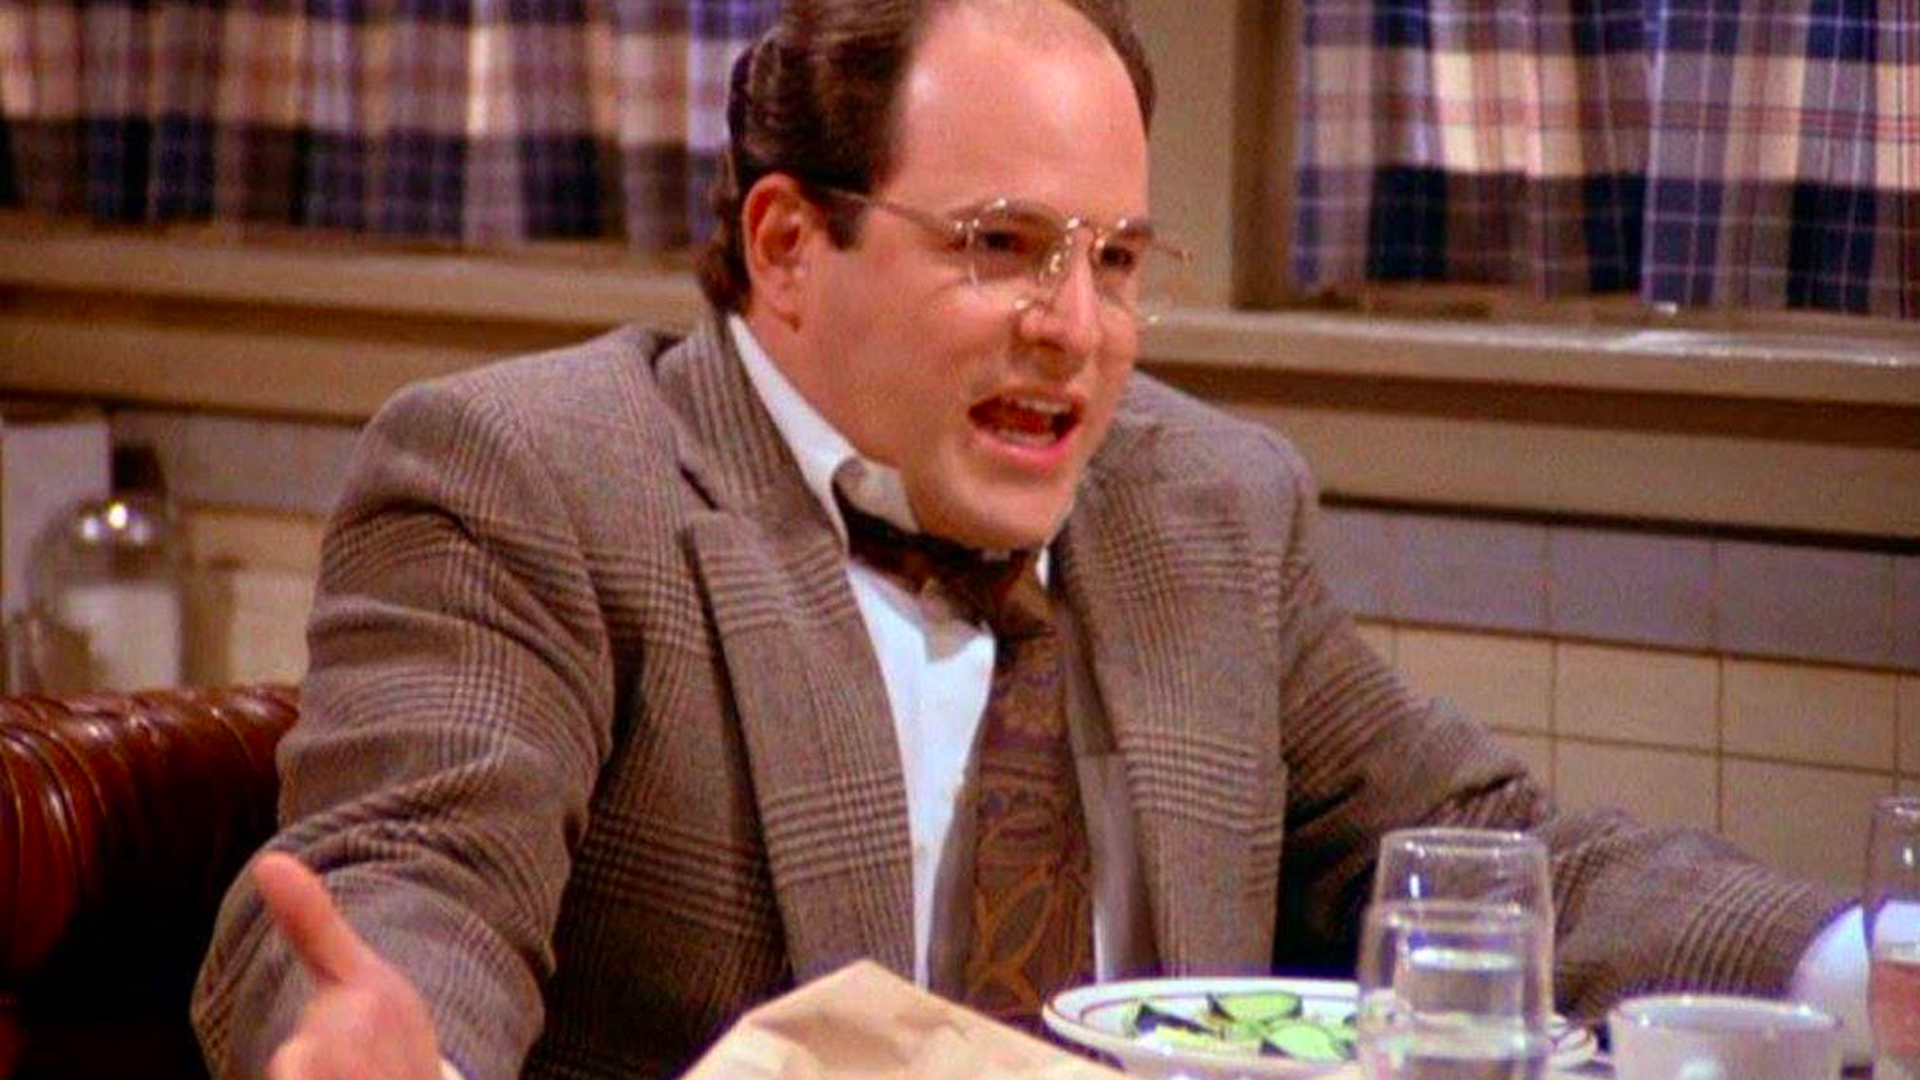 A New Bar in Australia is Based on SEINFELD's George Costanza